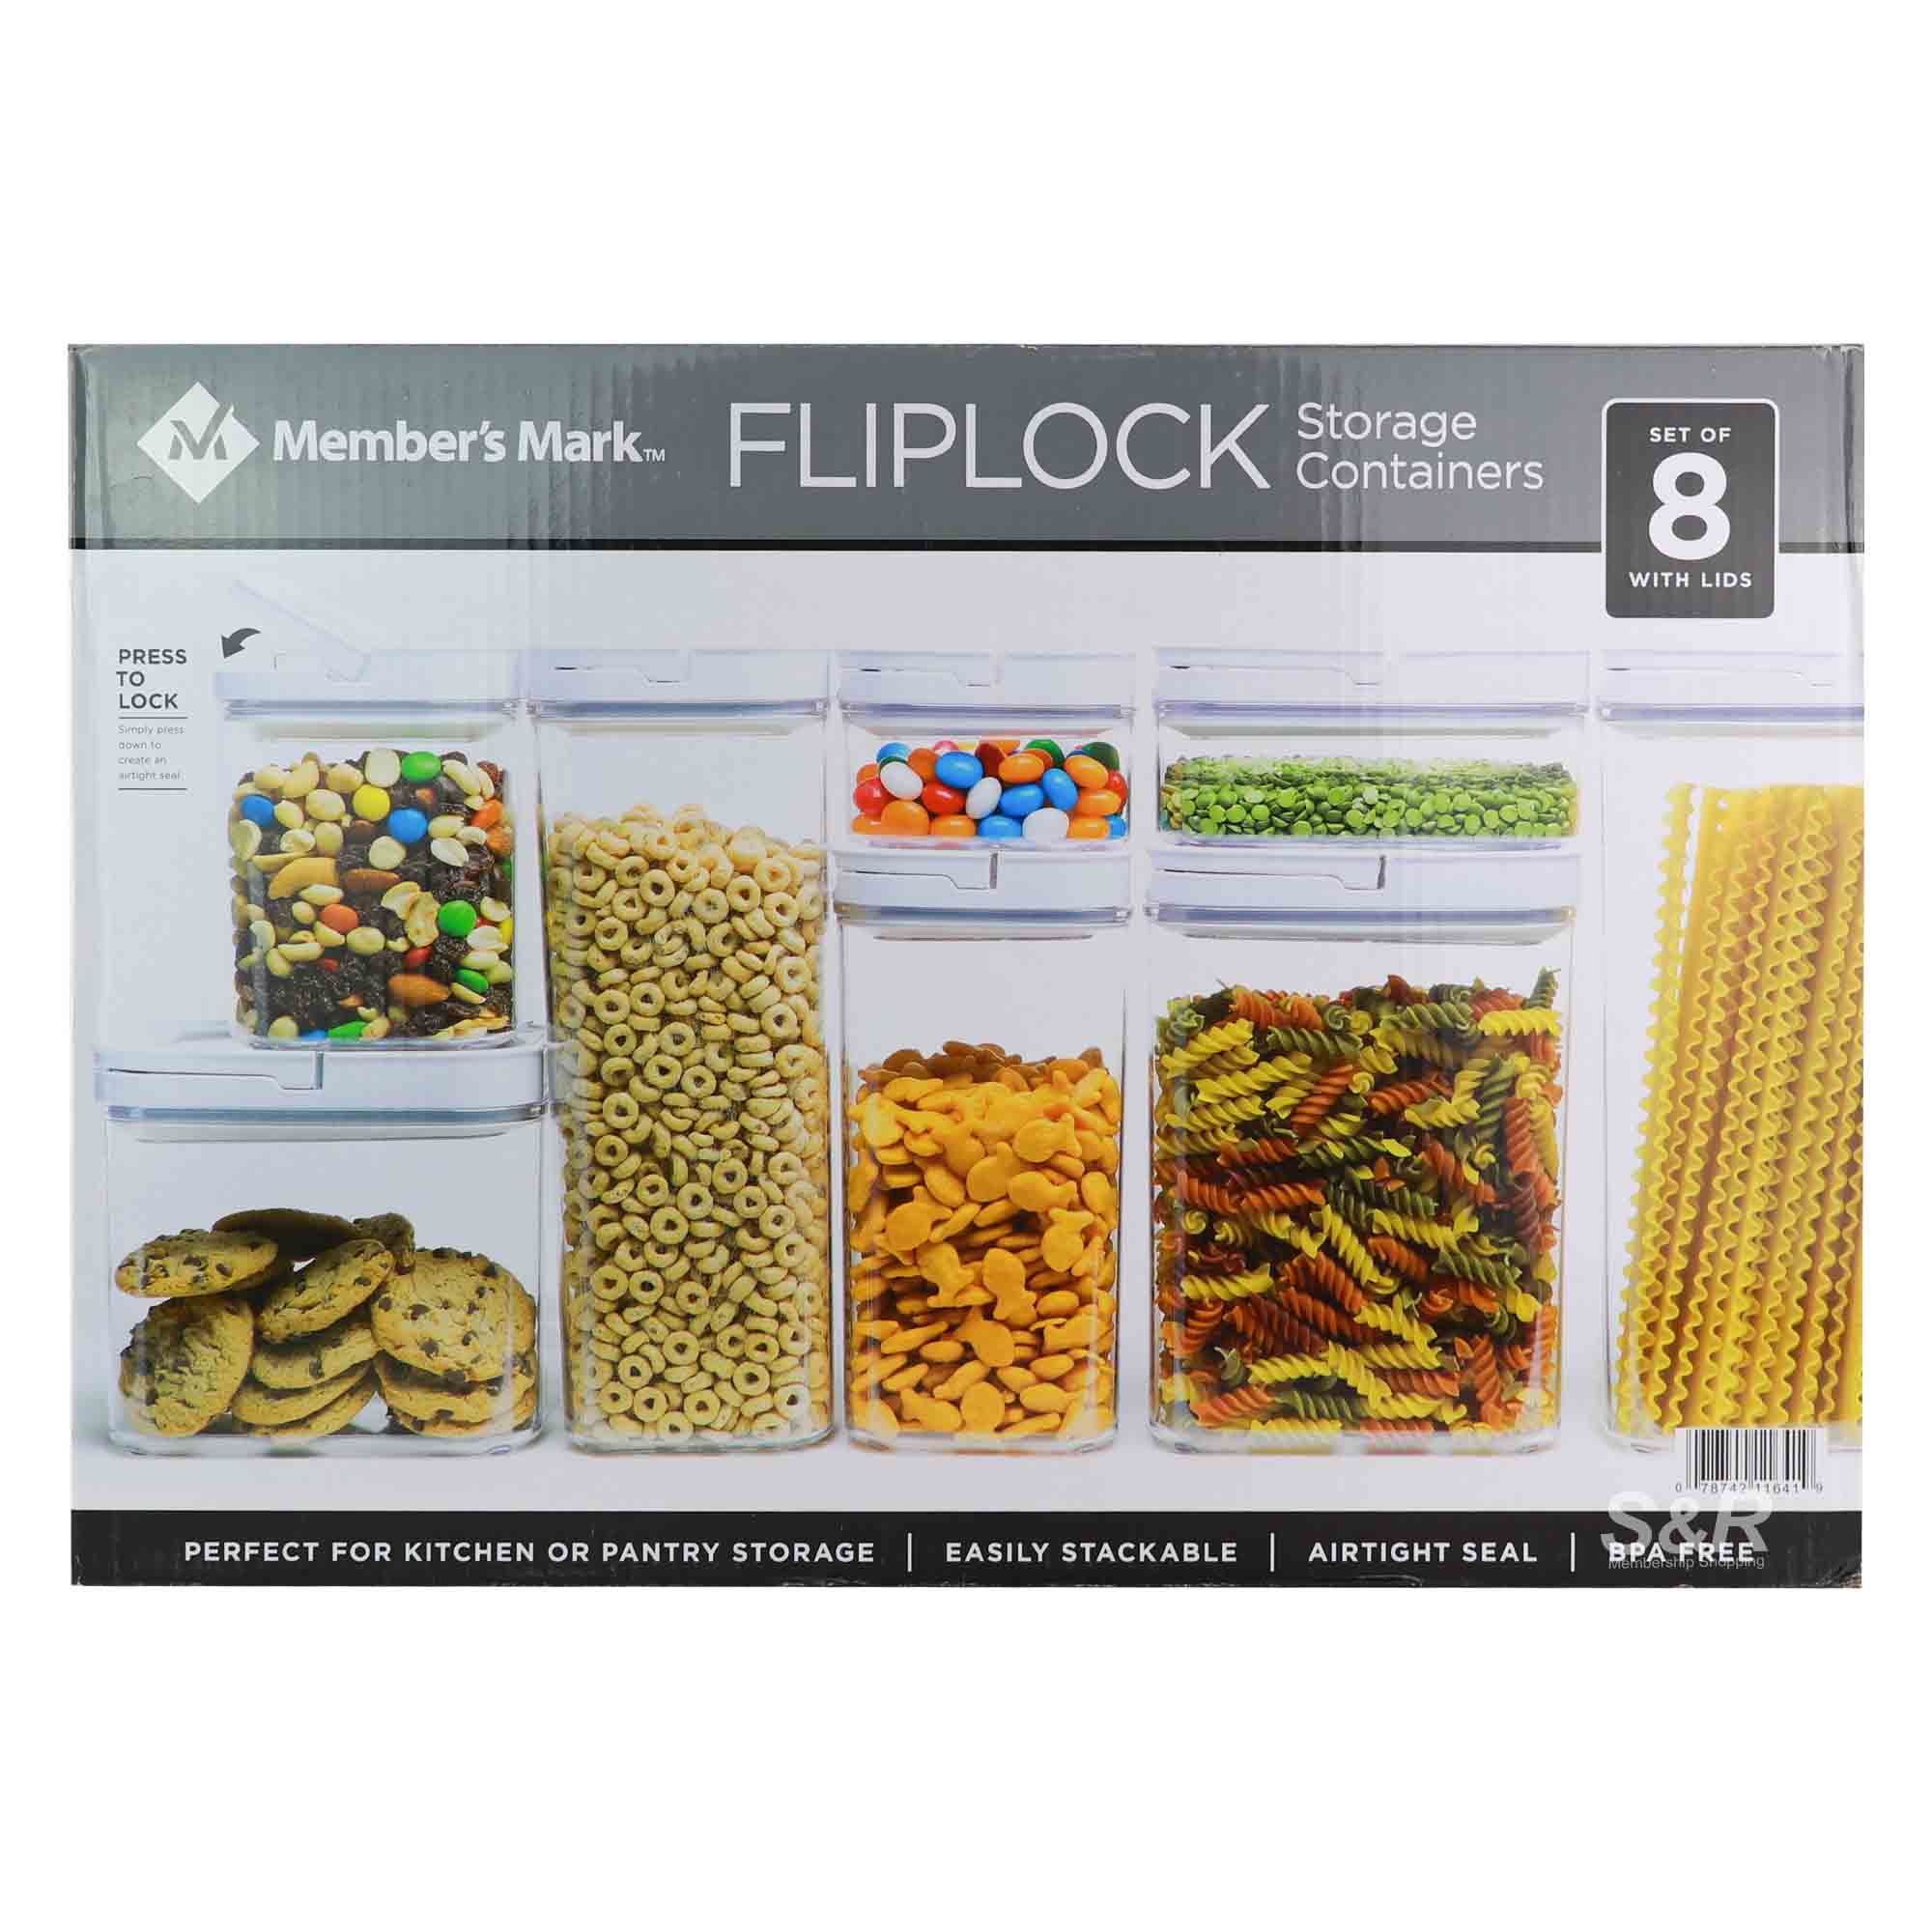 Cheap Airtight Storage Container, Member's Mark FLIPLOCK Review